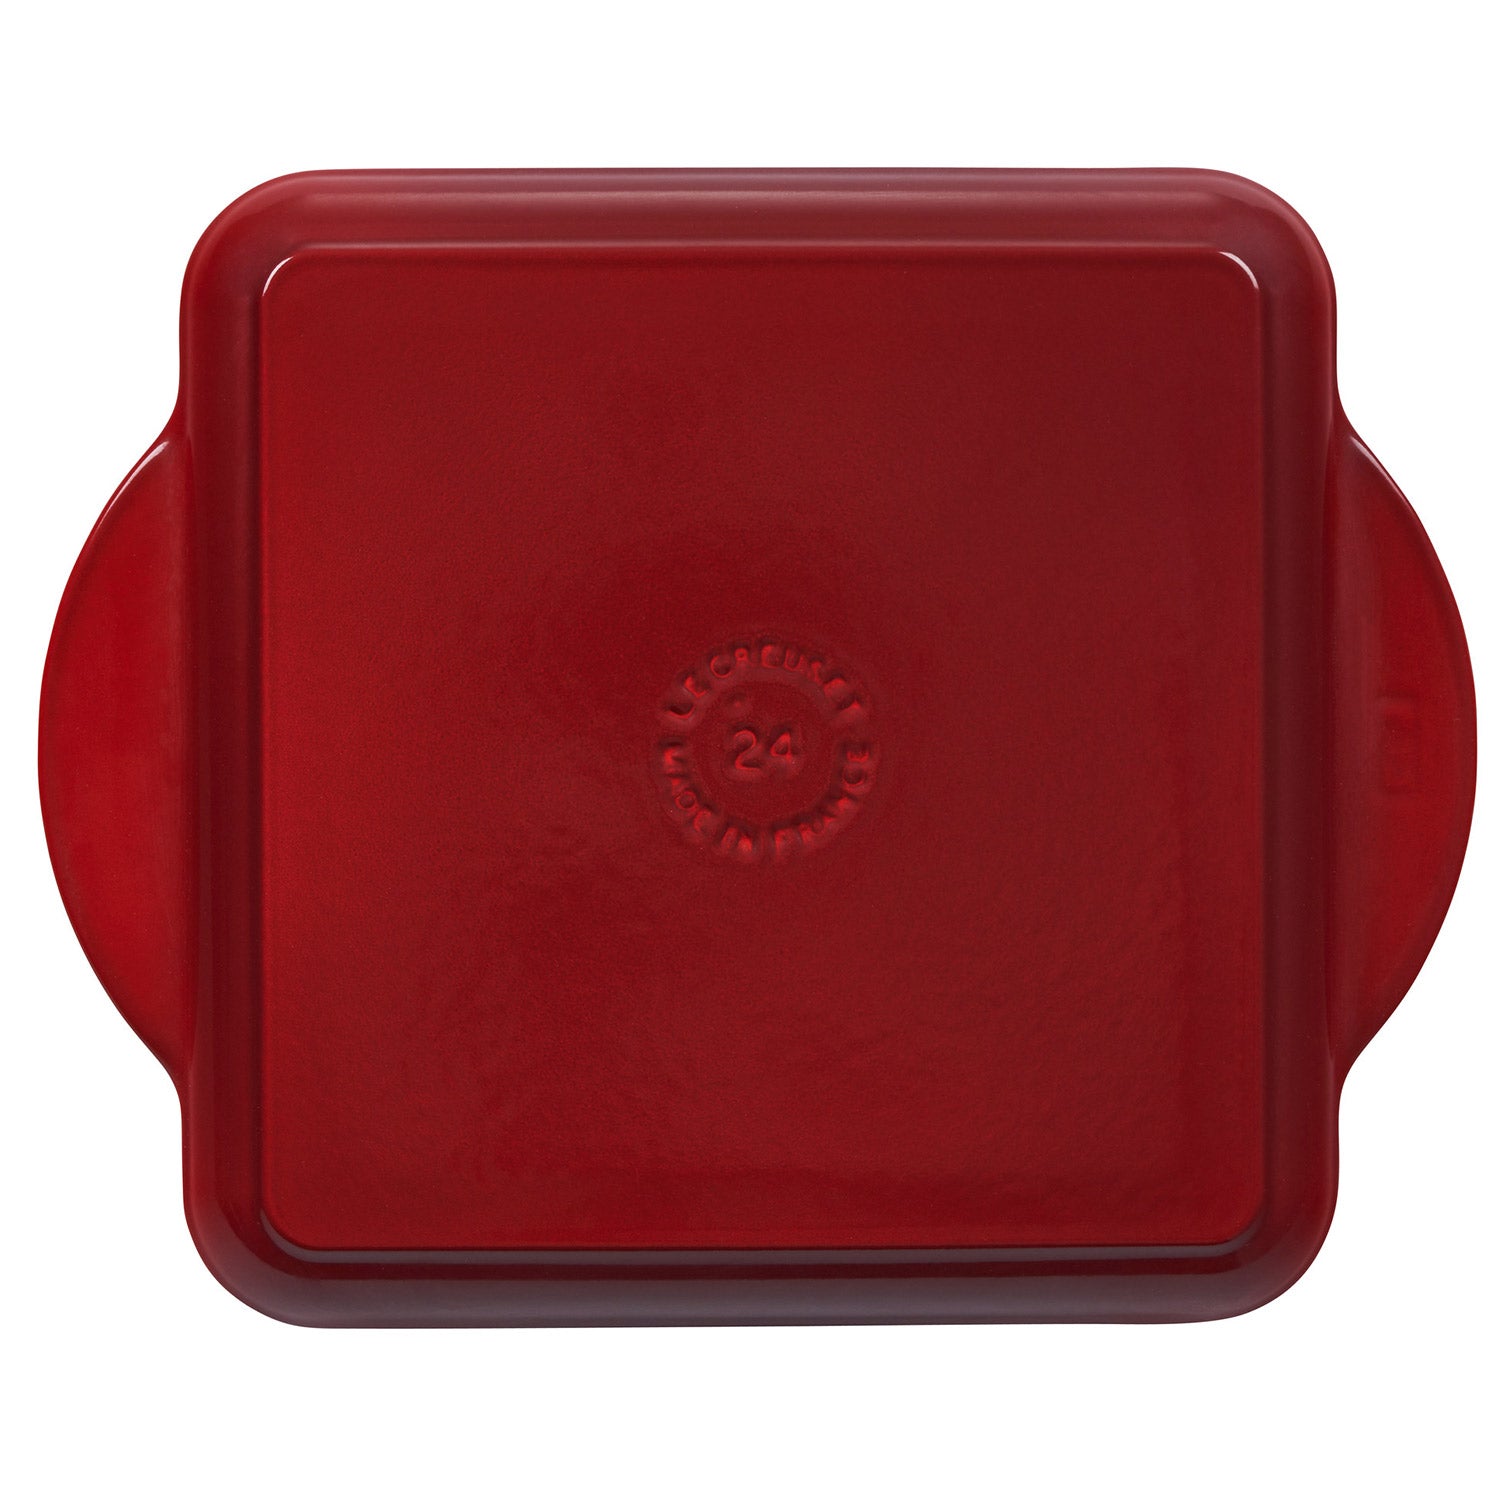 Le Creuset 9.5 Square Grill Pan